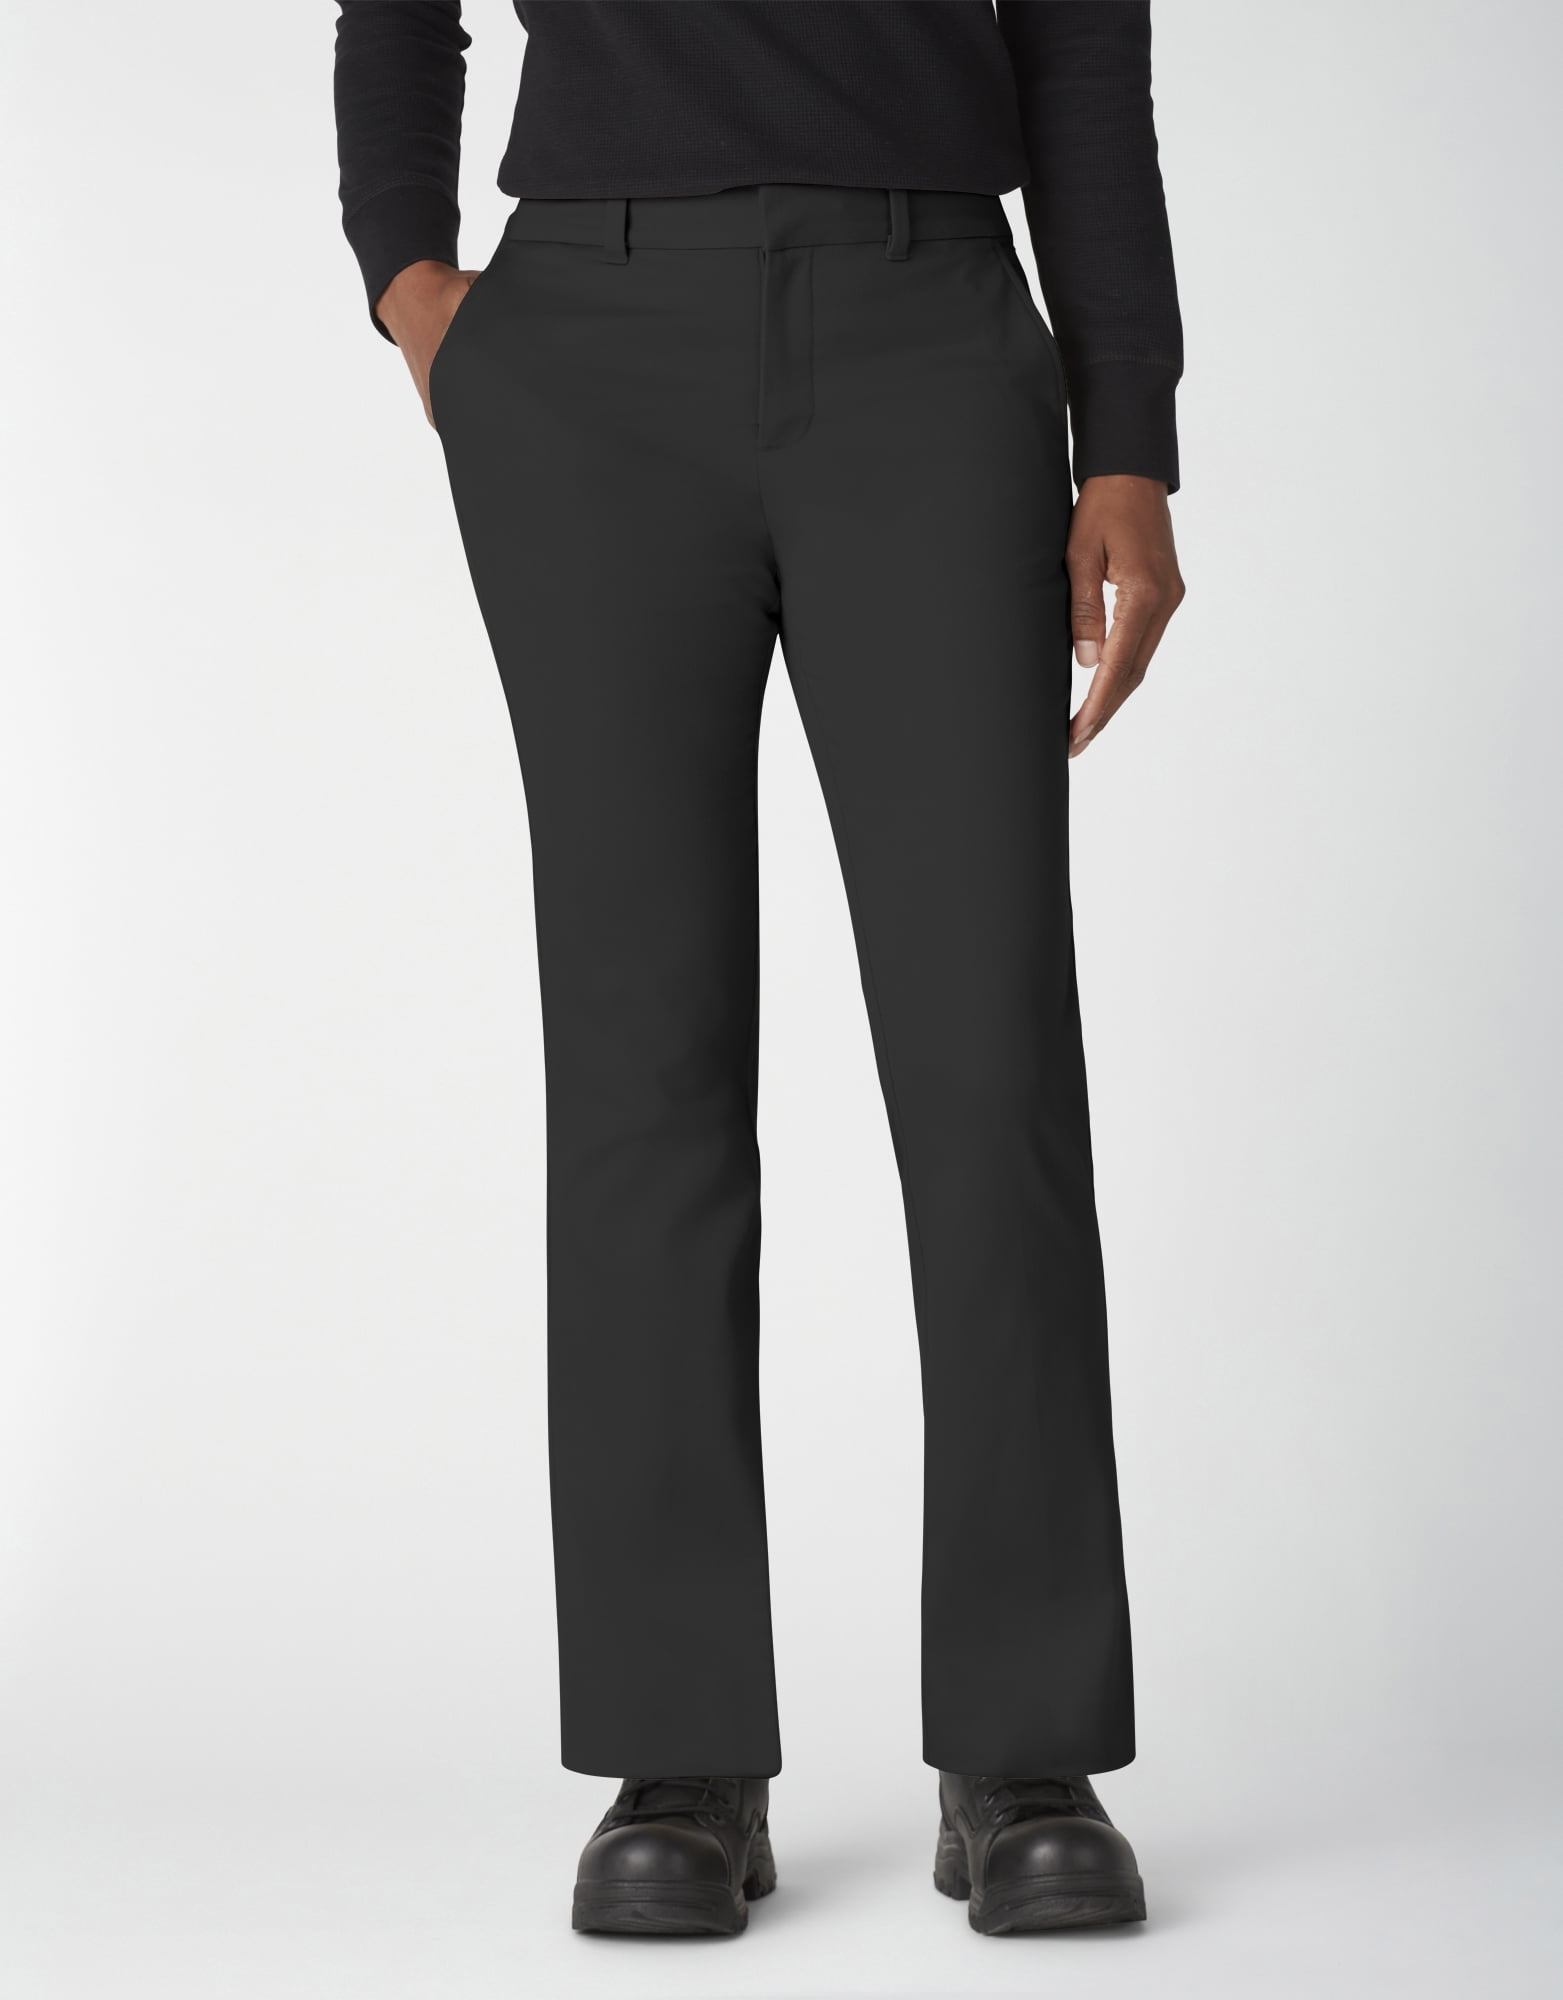 Womans Tailored Wide Leg Trousers Office Work Bootcut Smart Formal Black Trouser 